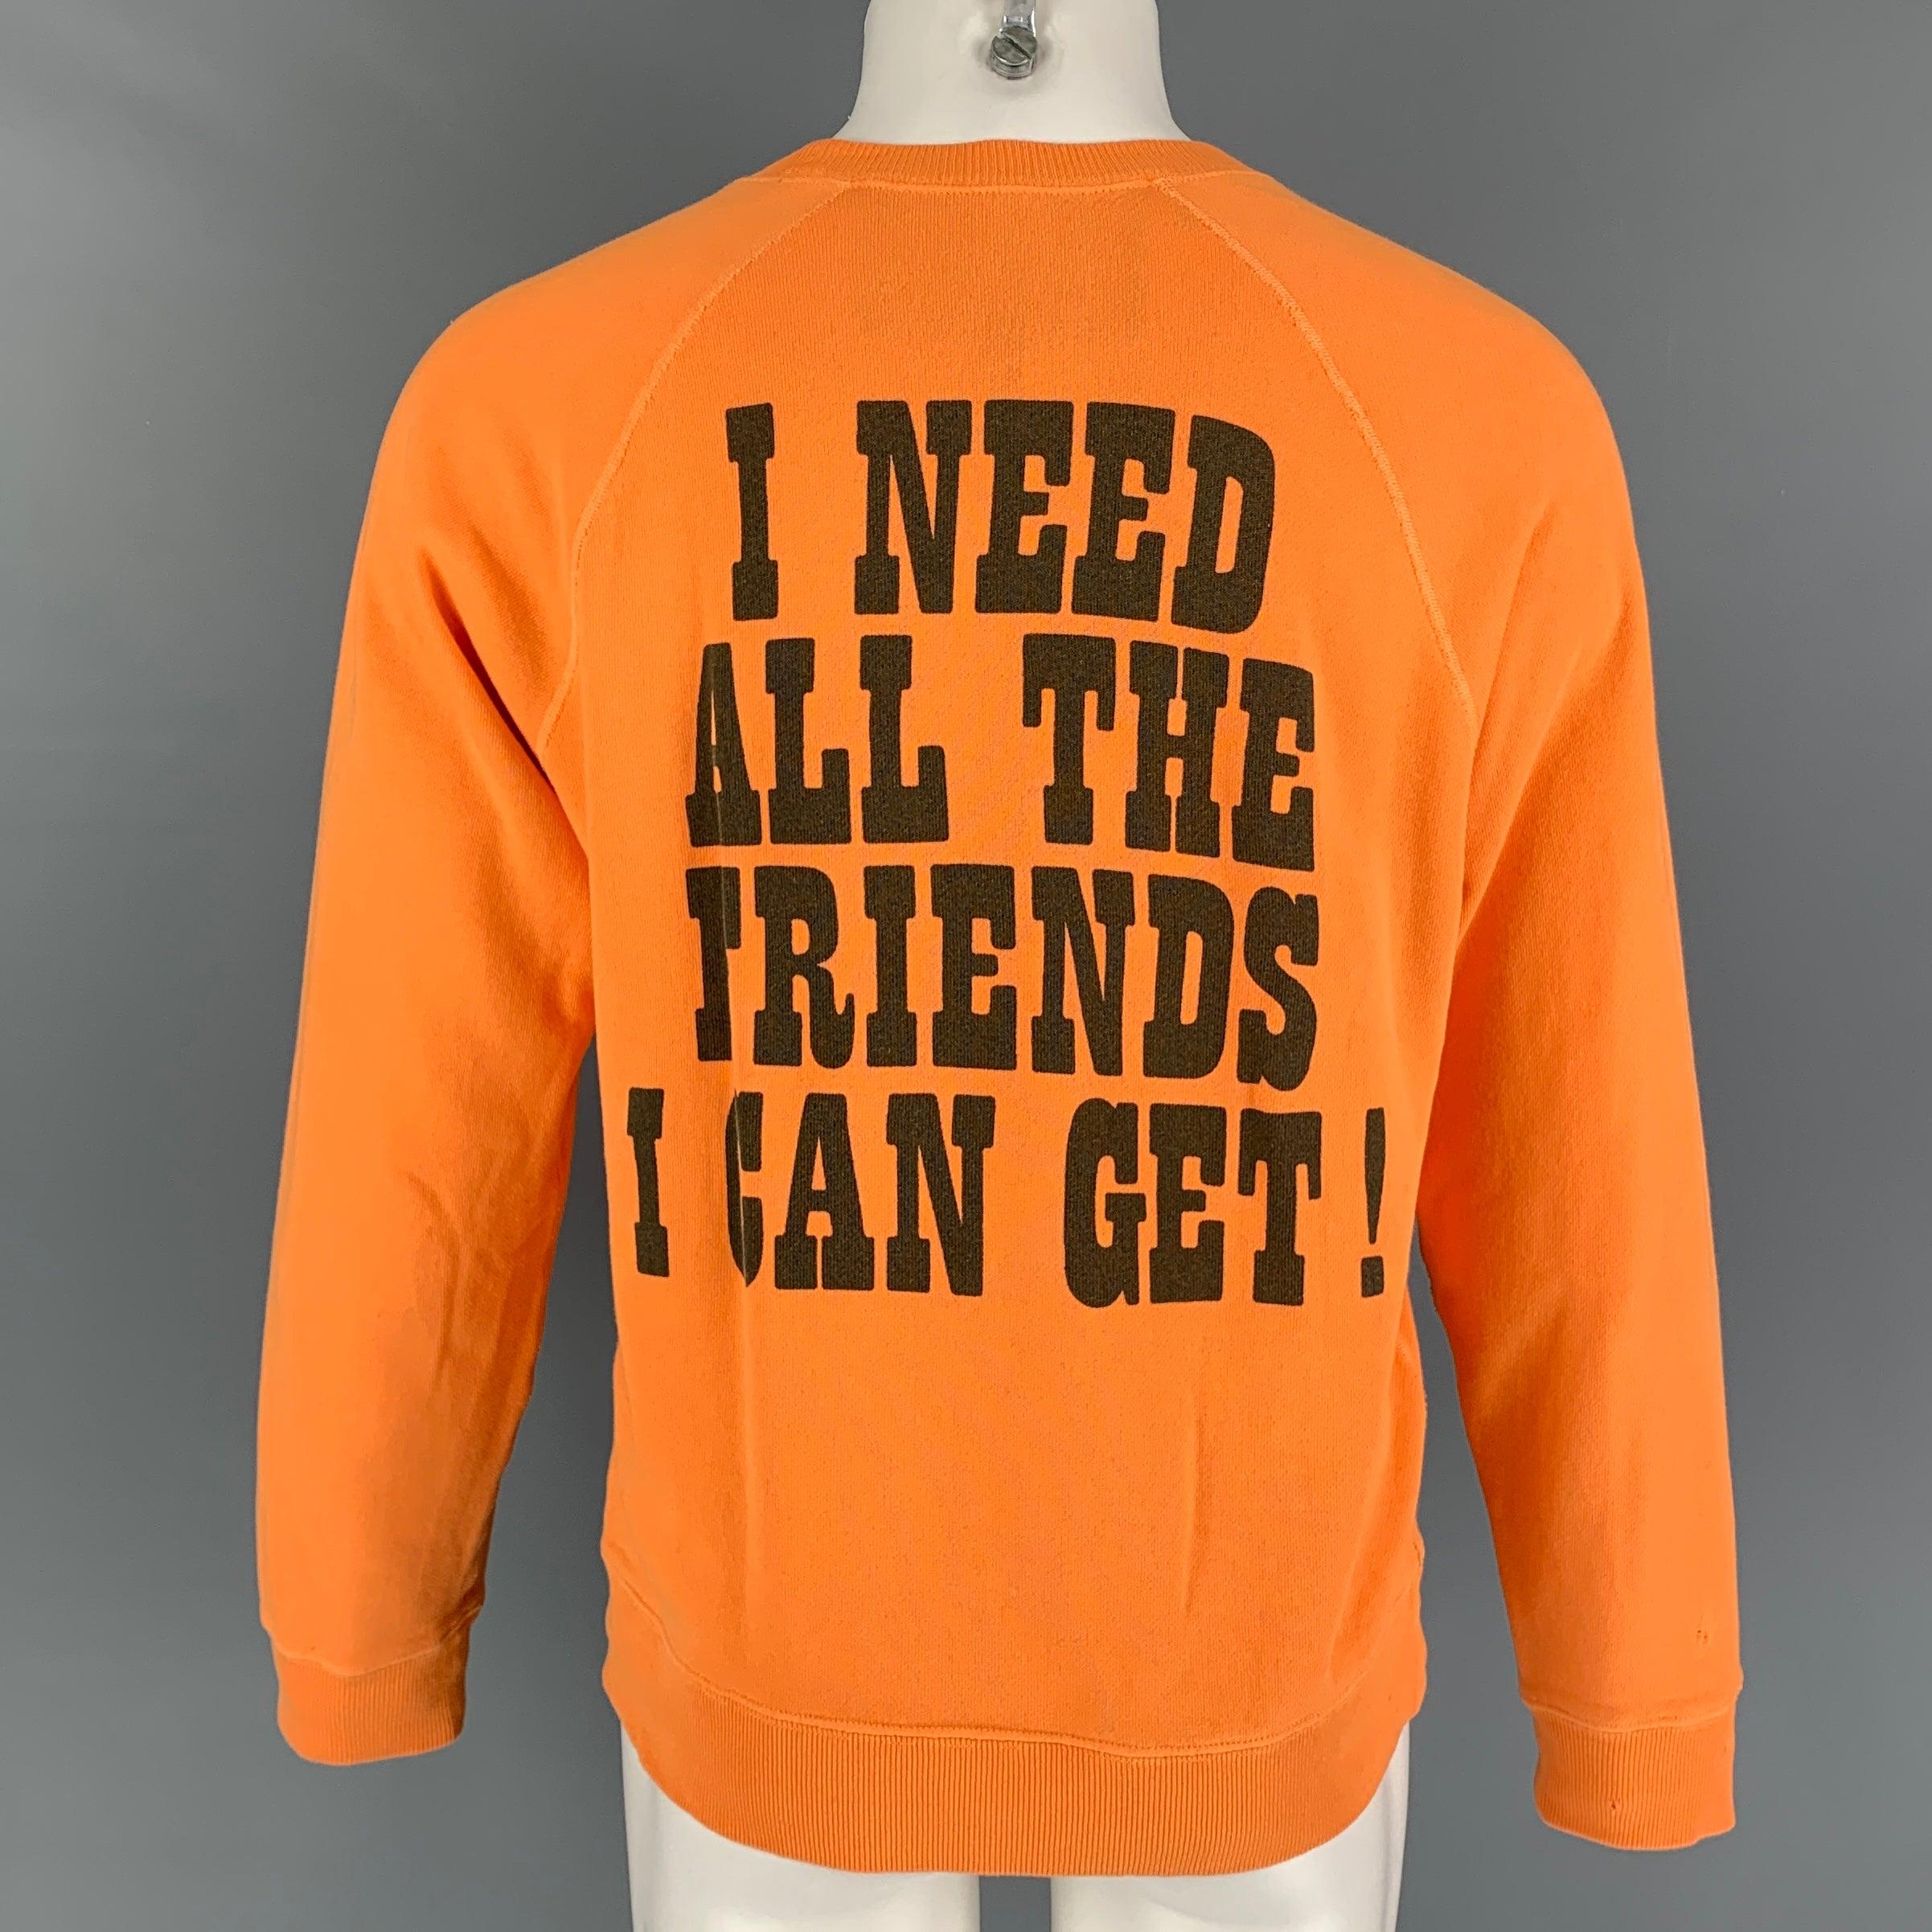 MARC JACOBS x PEANUTS sweatshirt comes n a orange & black cotton featuring a front Charlie Brown graphic, loose fit, distressed details, and a crew-neck.
Excellent
Pre-Owned Condition. 

Marked:   XS 

Measurements: 
 
Shoulder: 16 inches Chest: 40